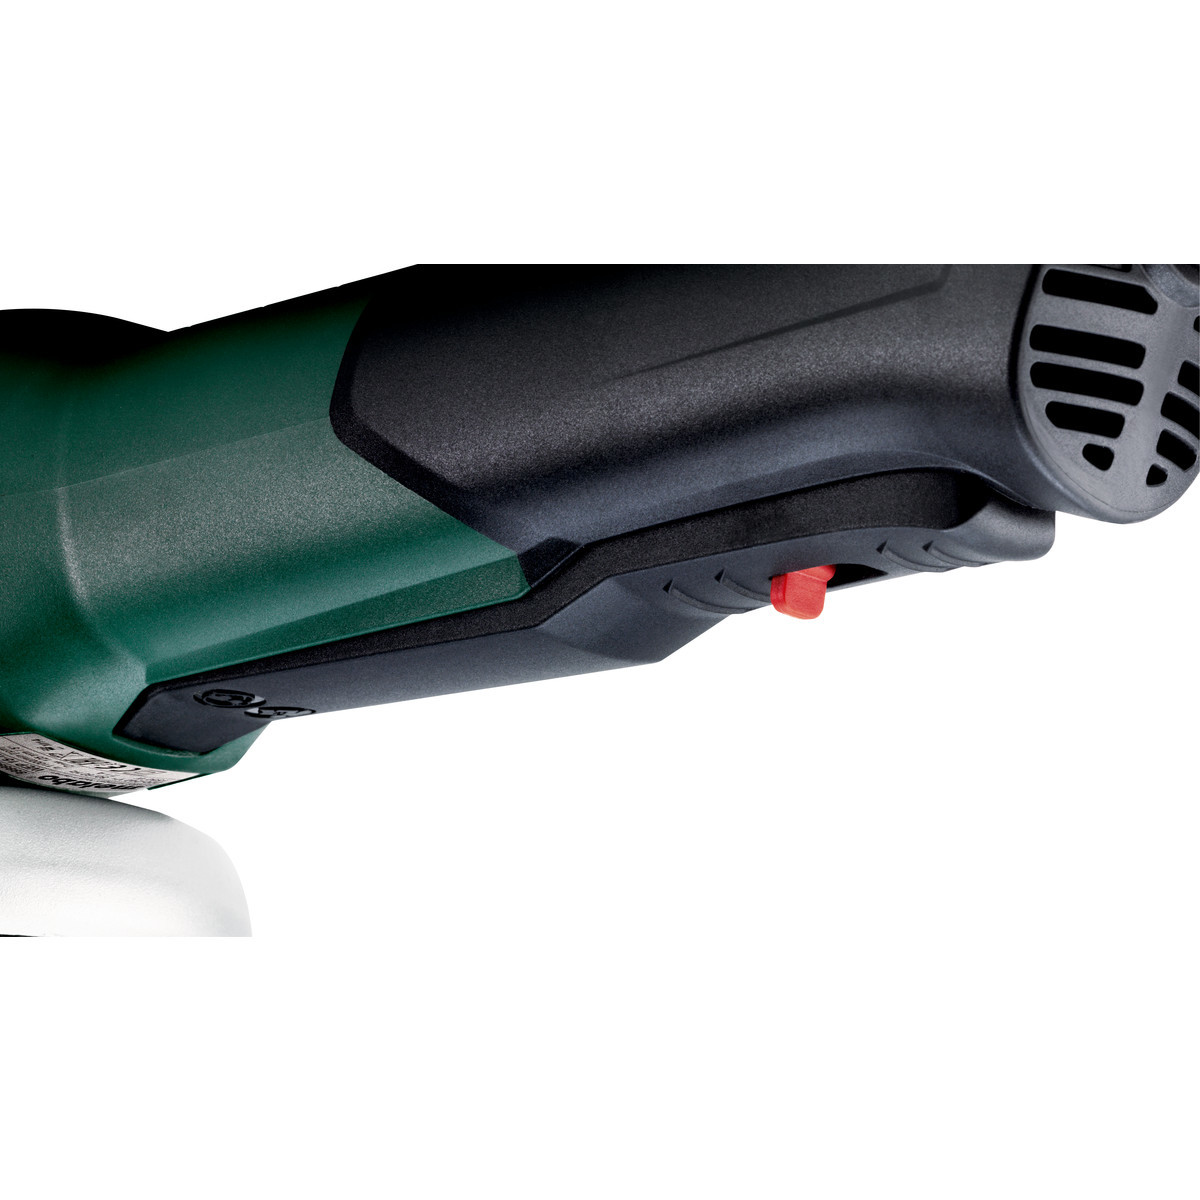 WEP17-150 QUICK RT Metabo 6' Angle Grinder 2